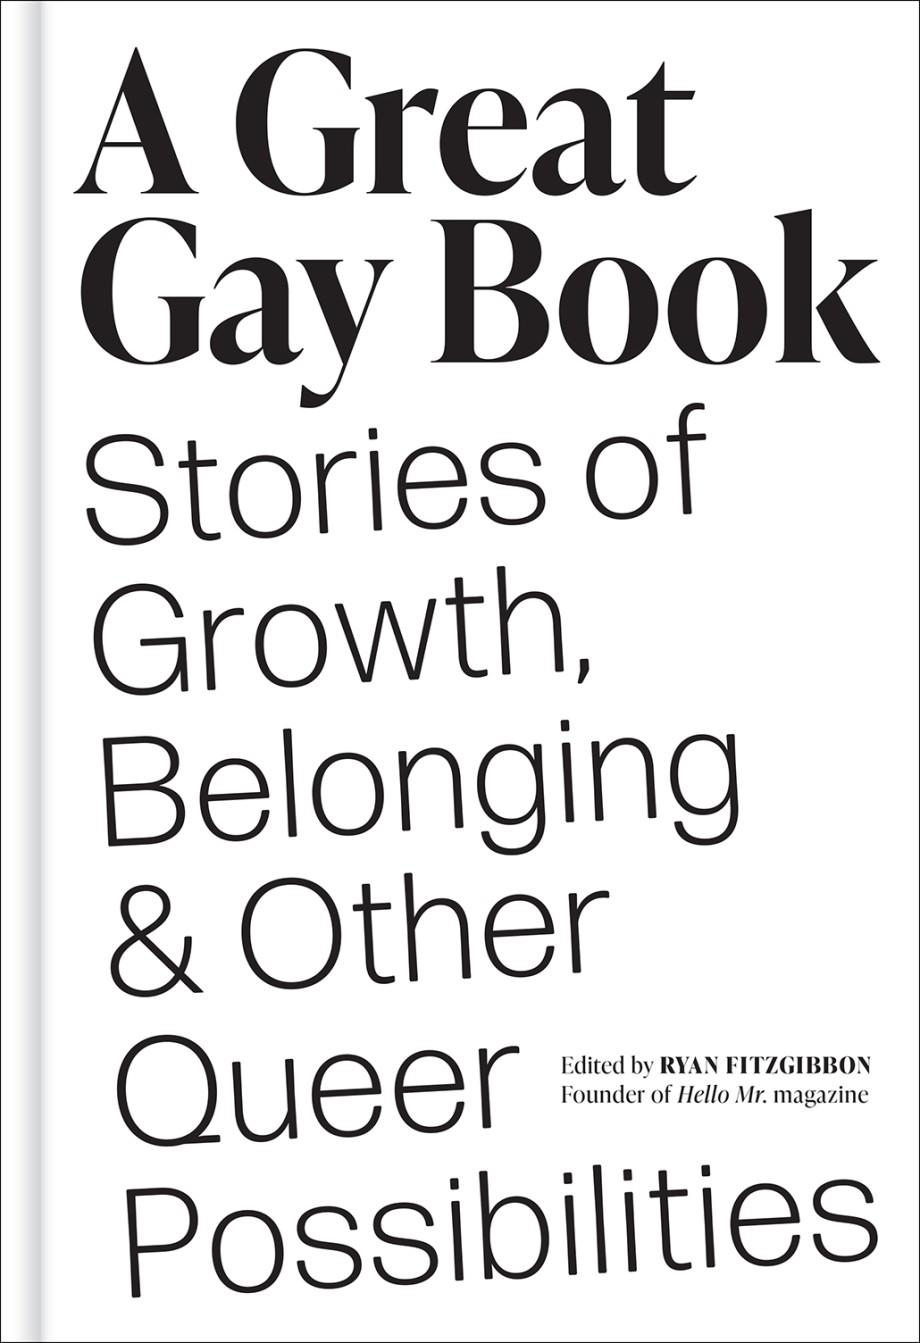 Great Gay Book Stories of Growth, Belonging & Other Queer Possibilities